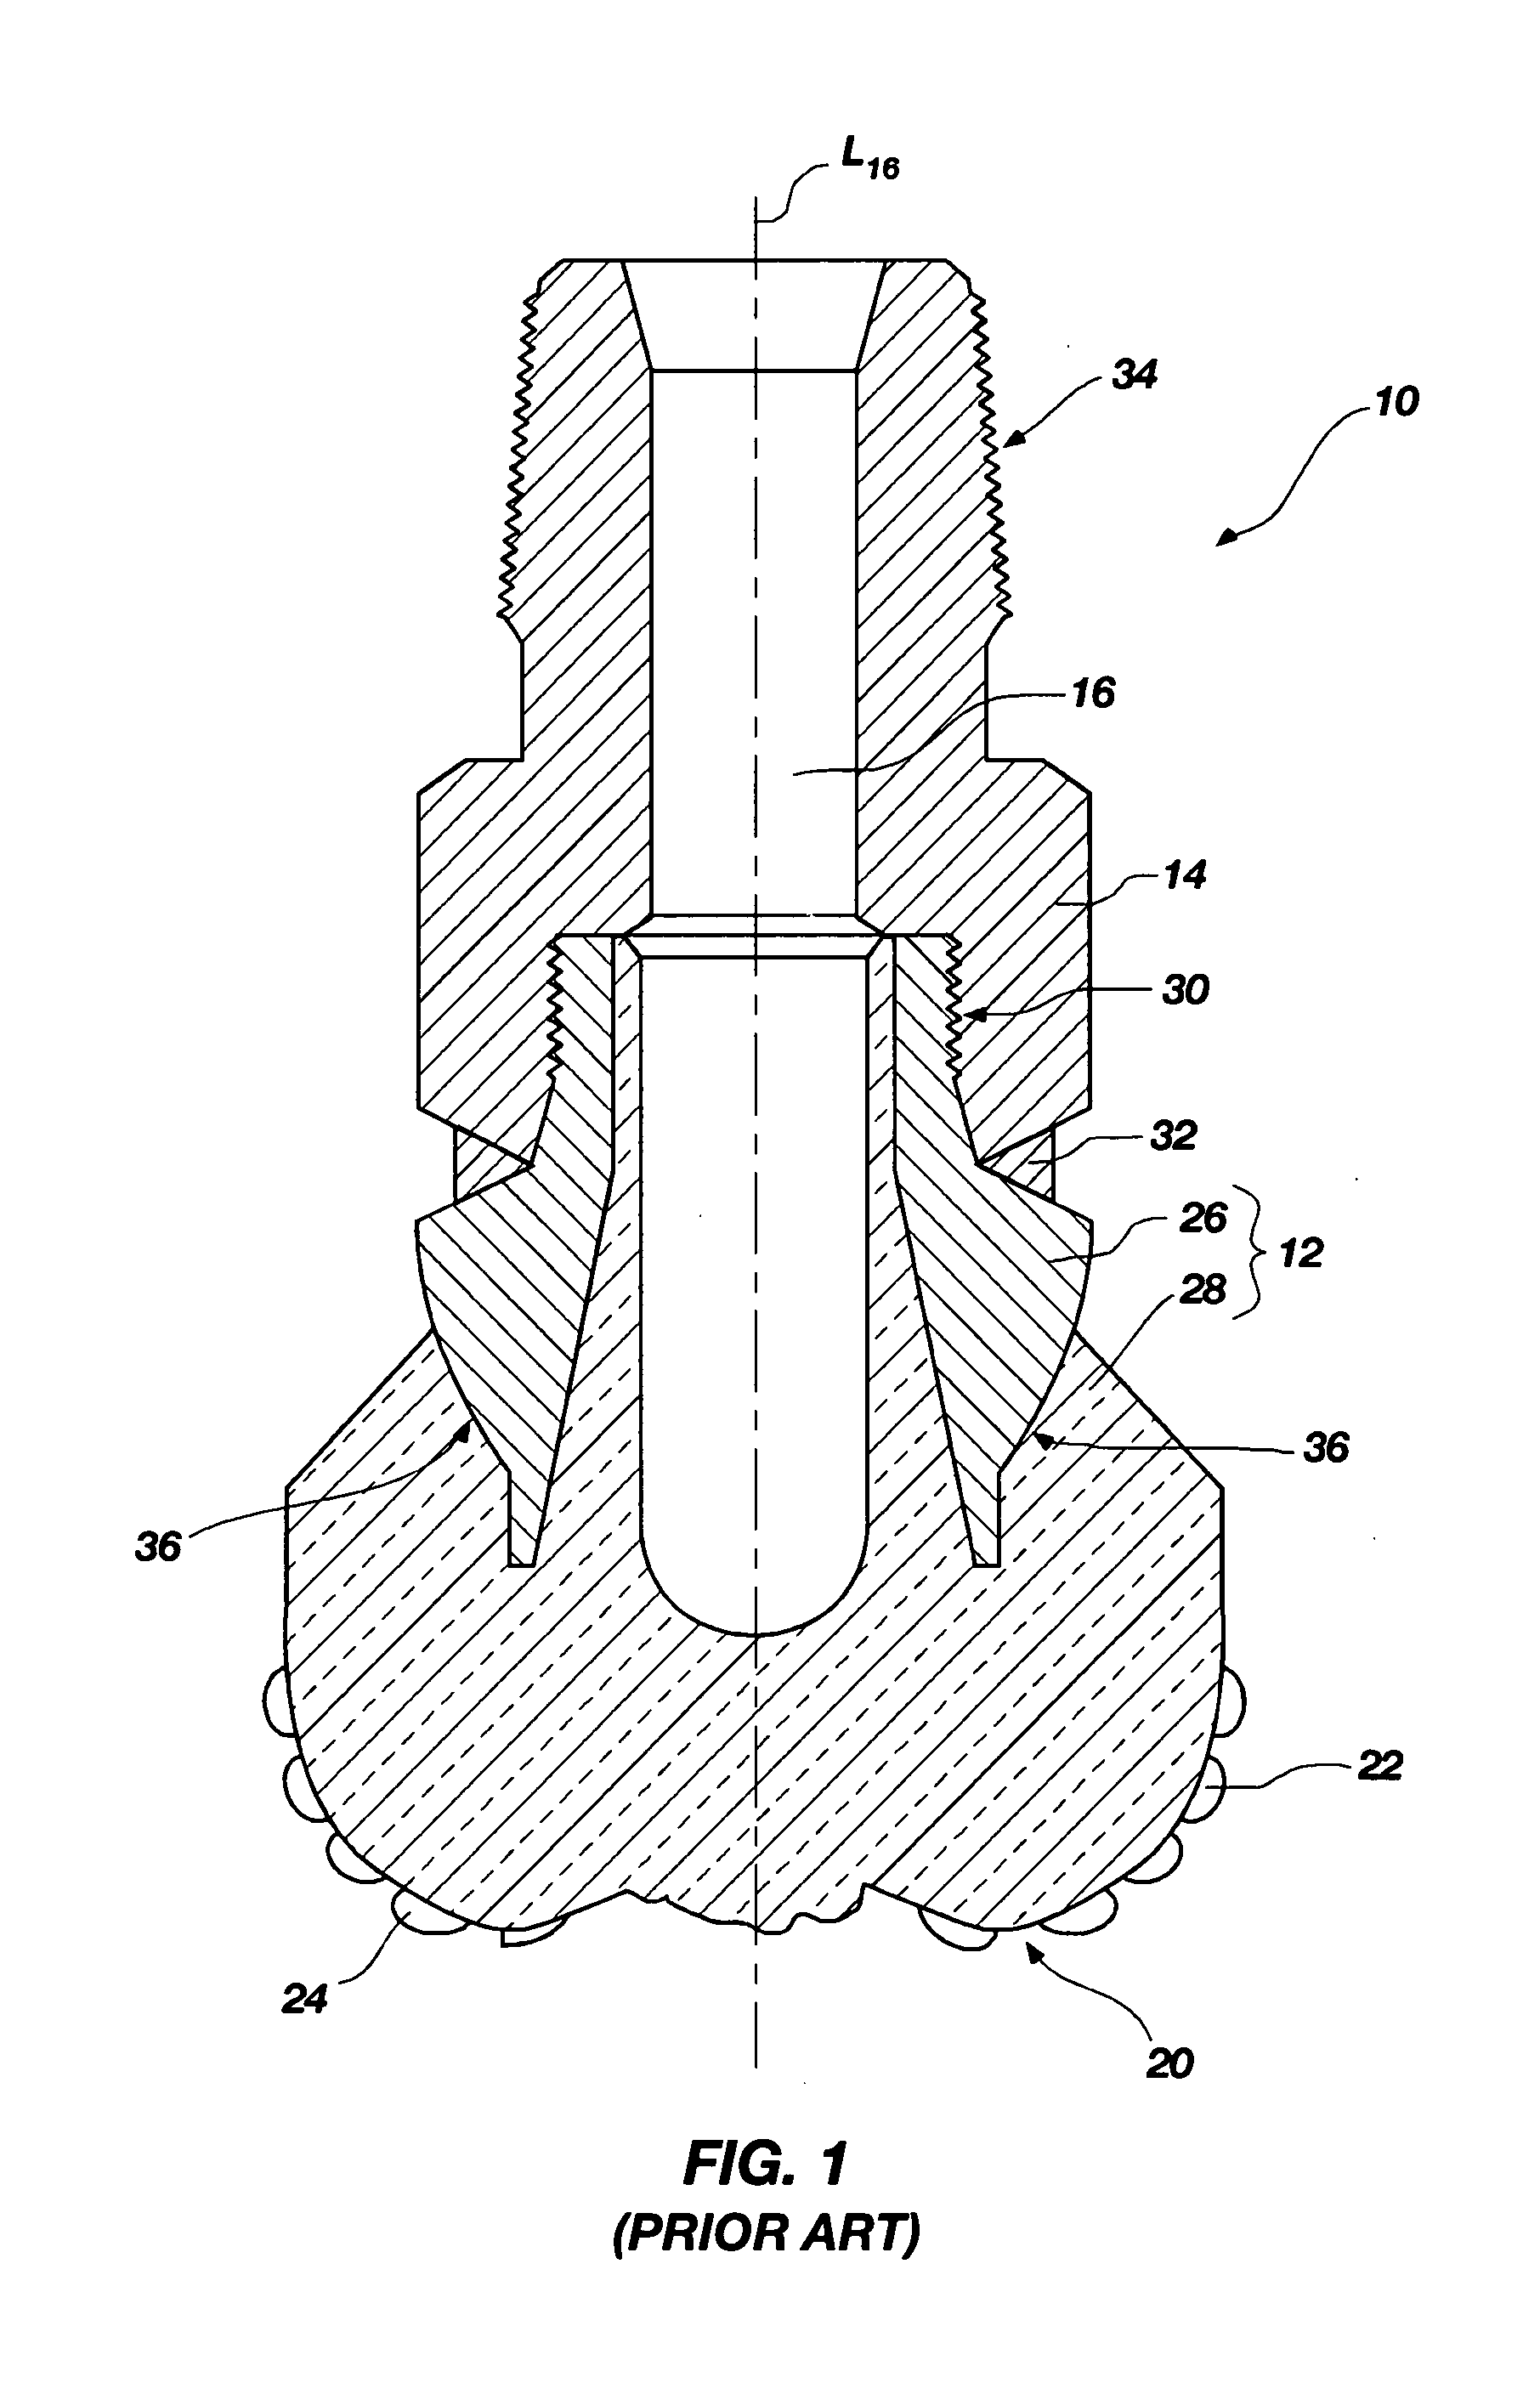 Rotary drill bits, methods of inspecting rotary drill bits, apparatuses and systems therefor